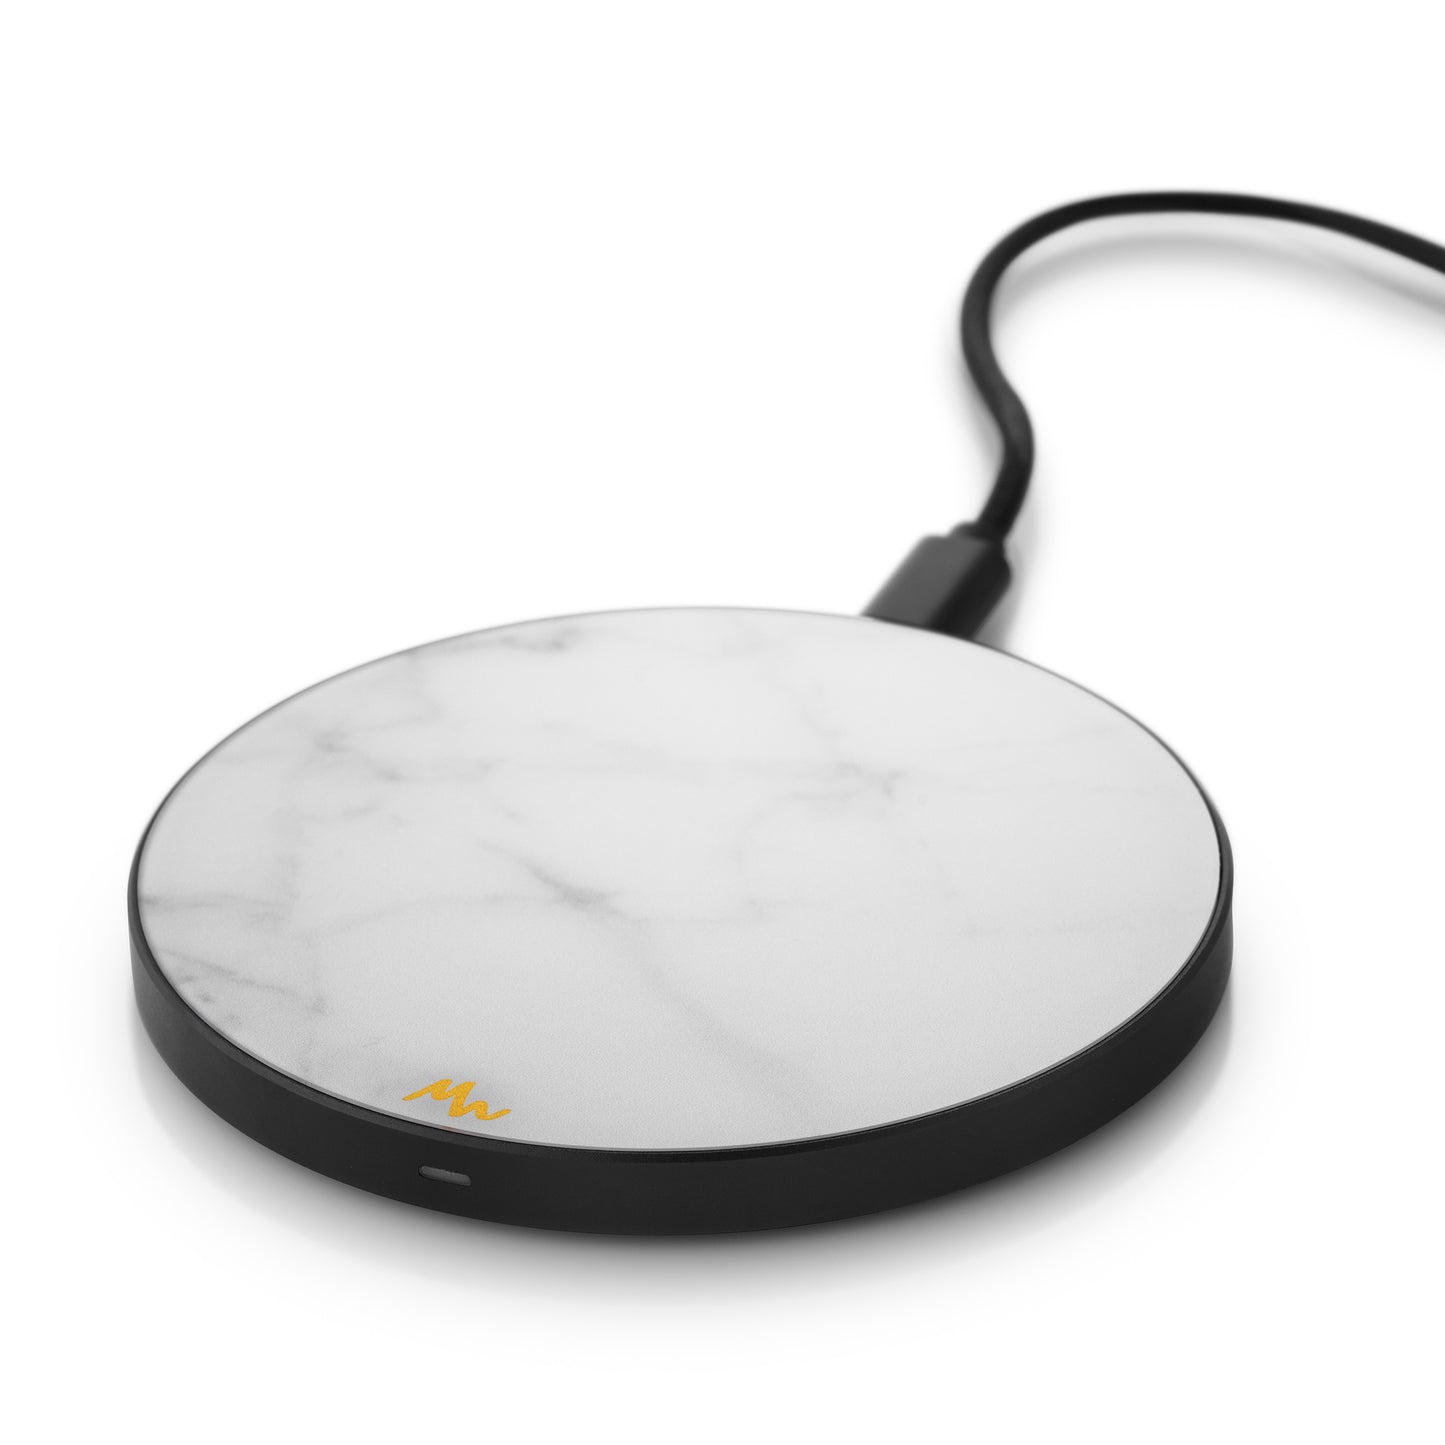 white and black Qi wireless mobile phone charger on white background